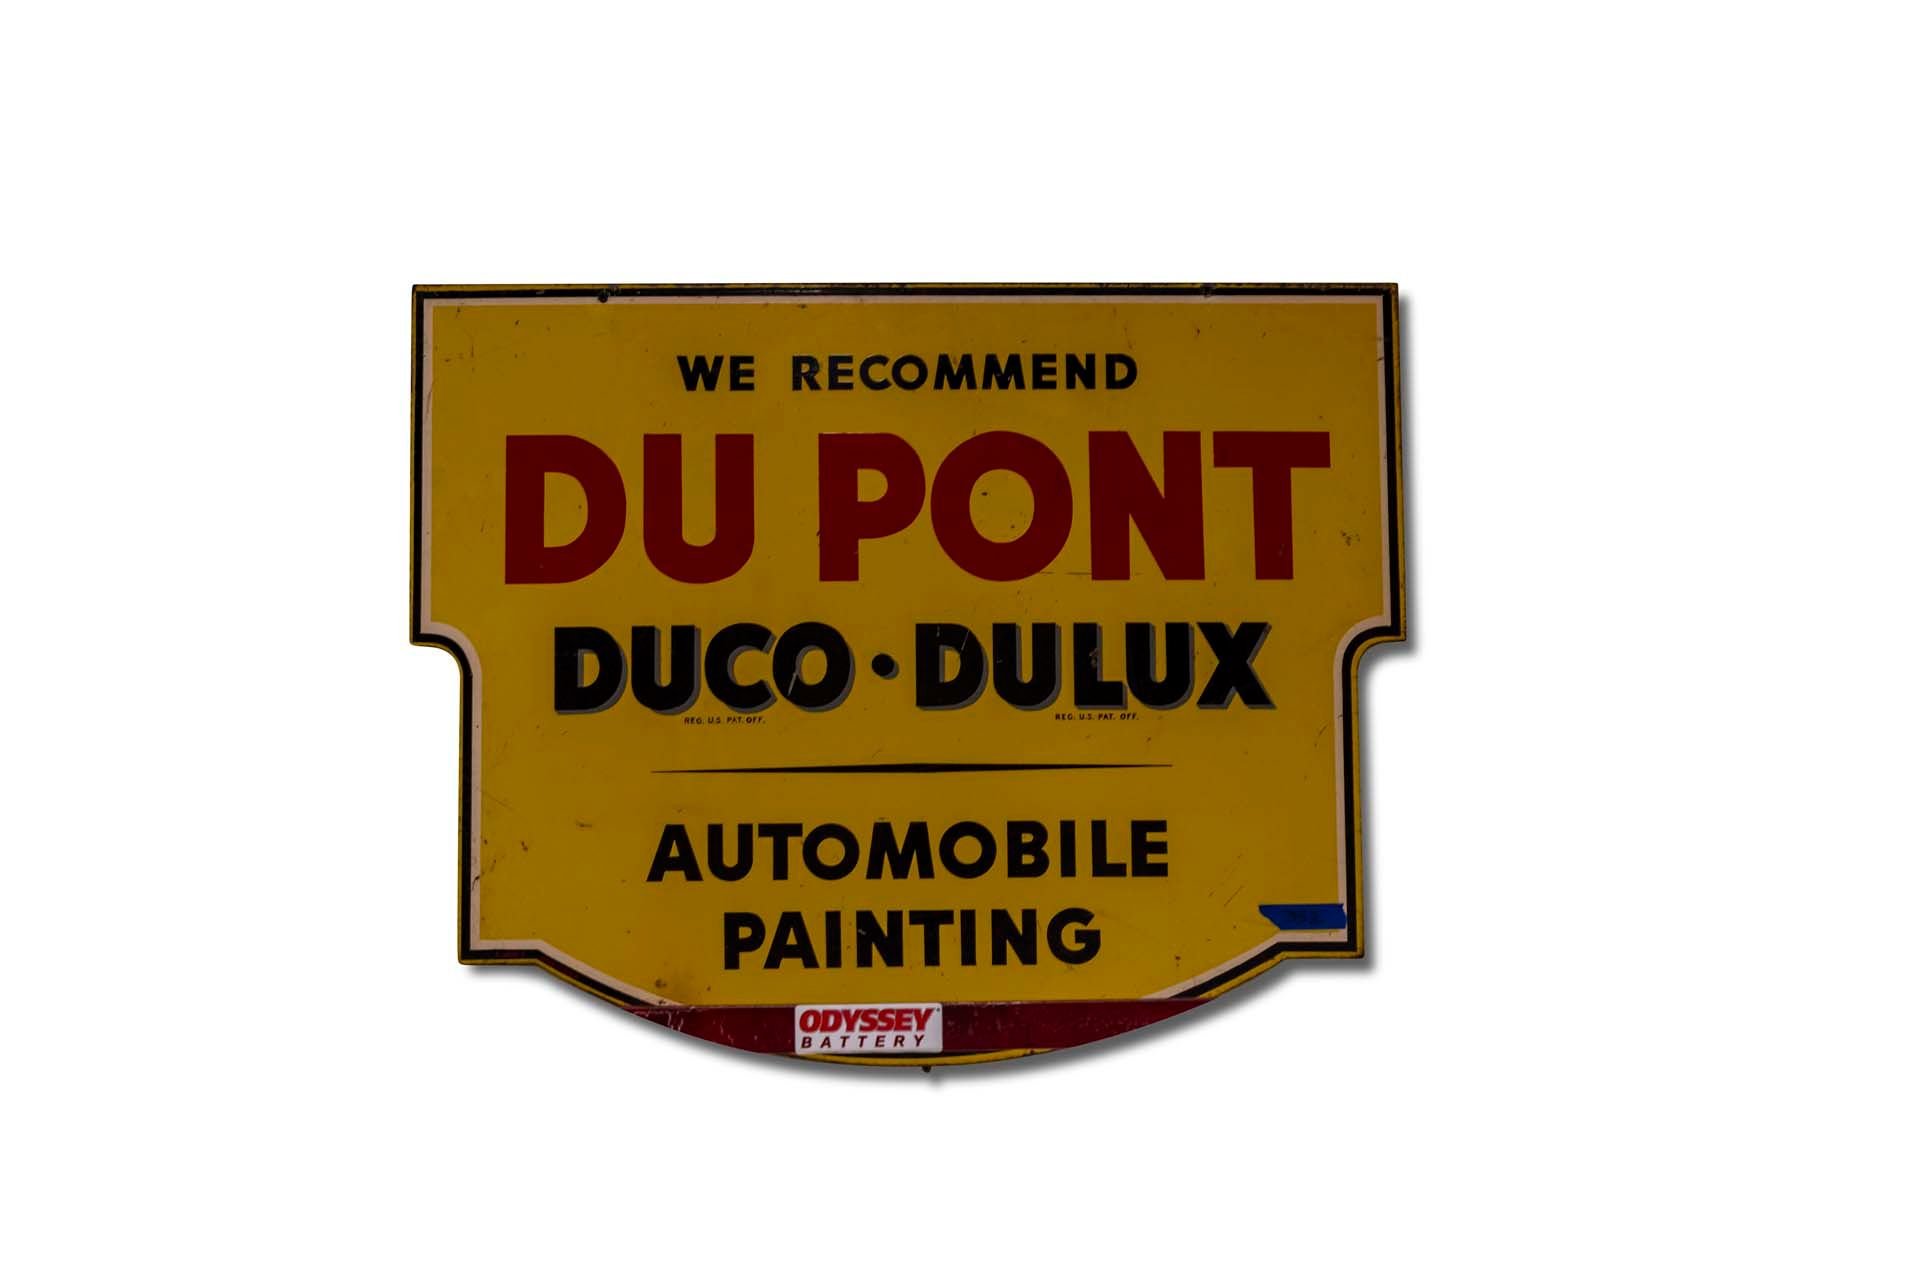 For Sale 'DuPont Automobile Painting' Painted Metal Sign